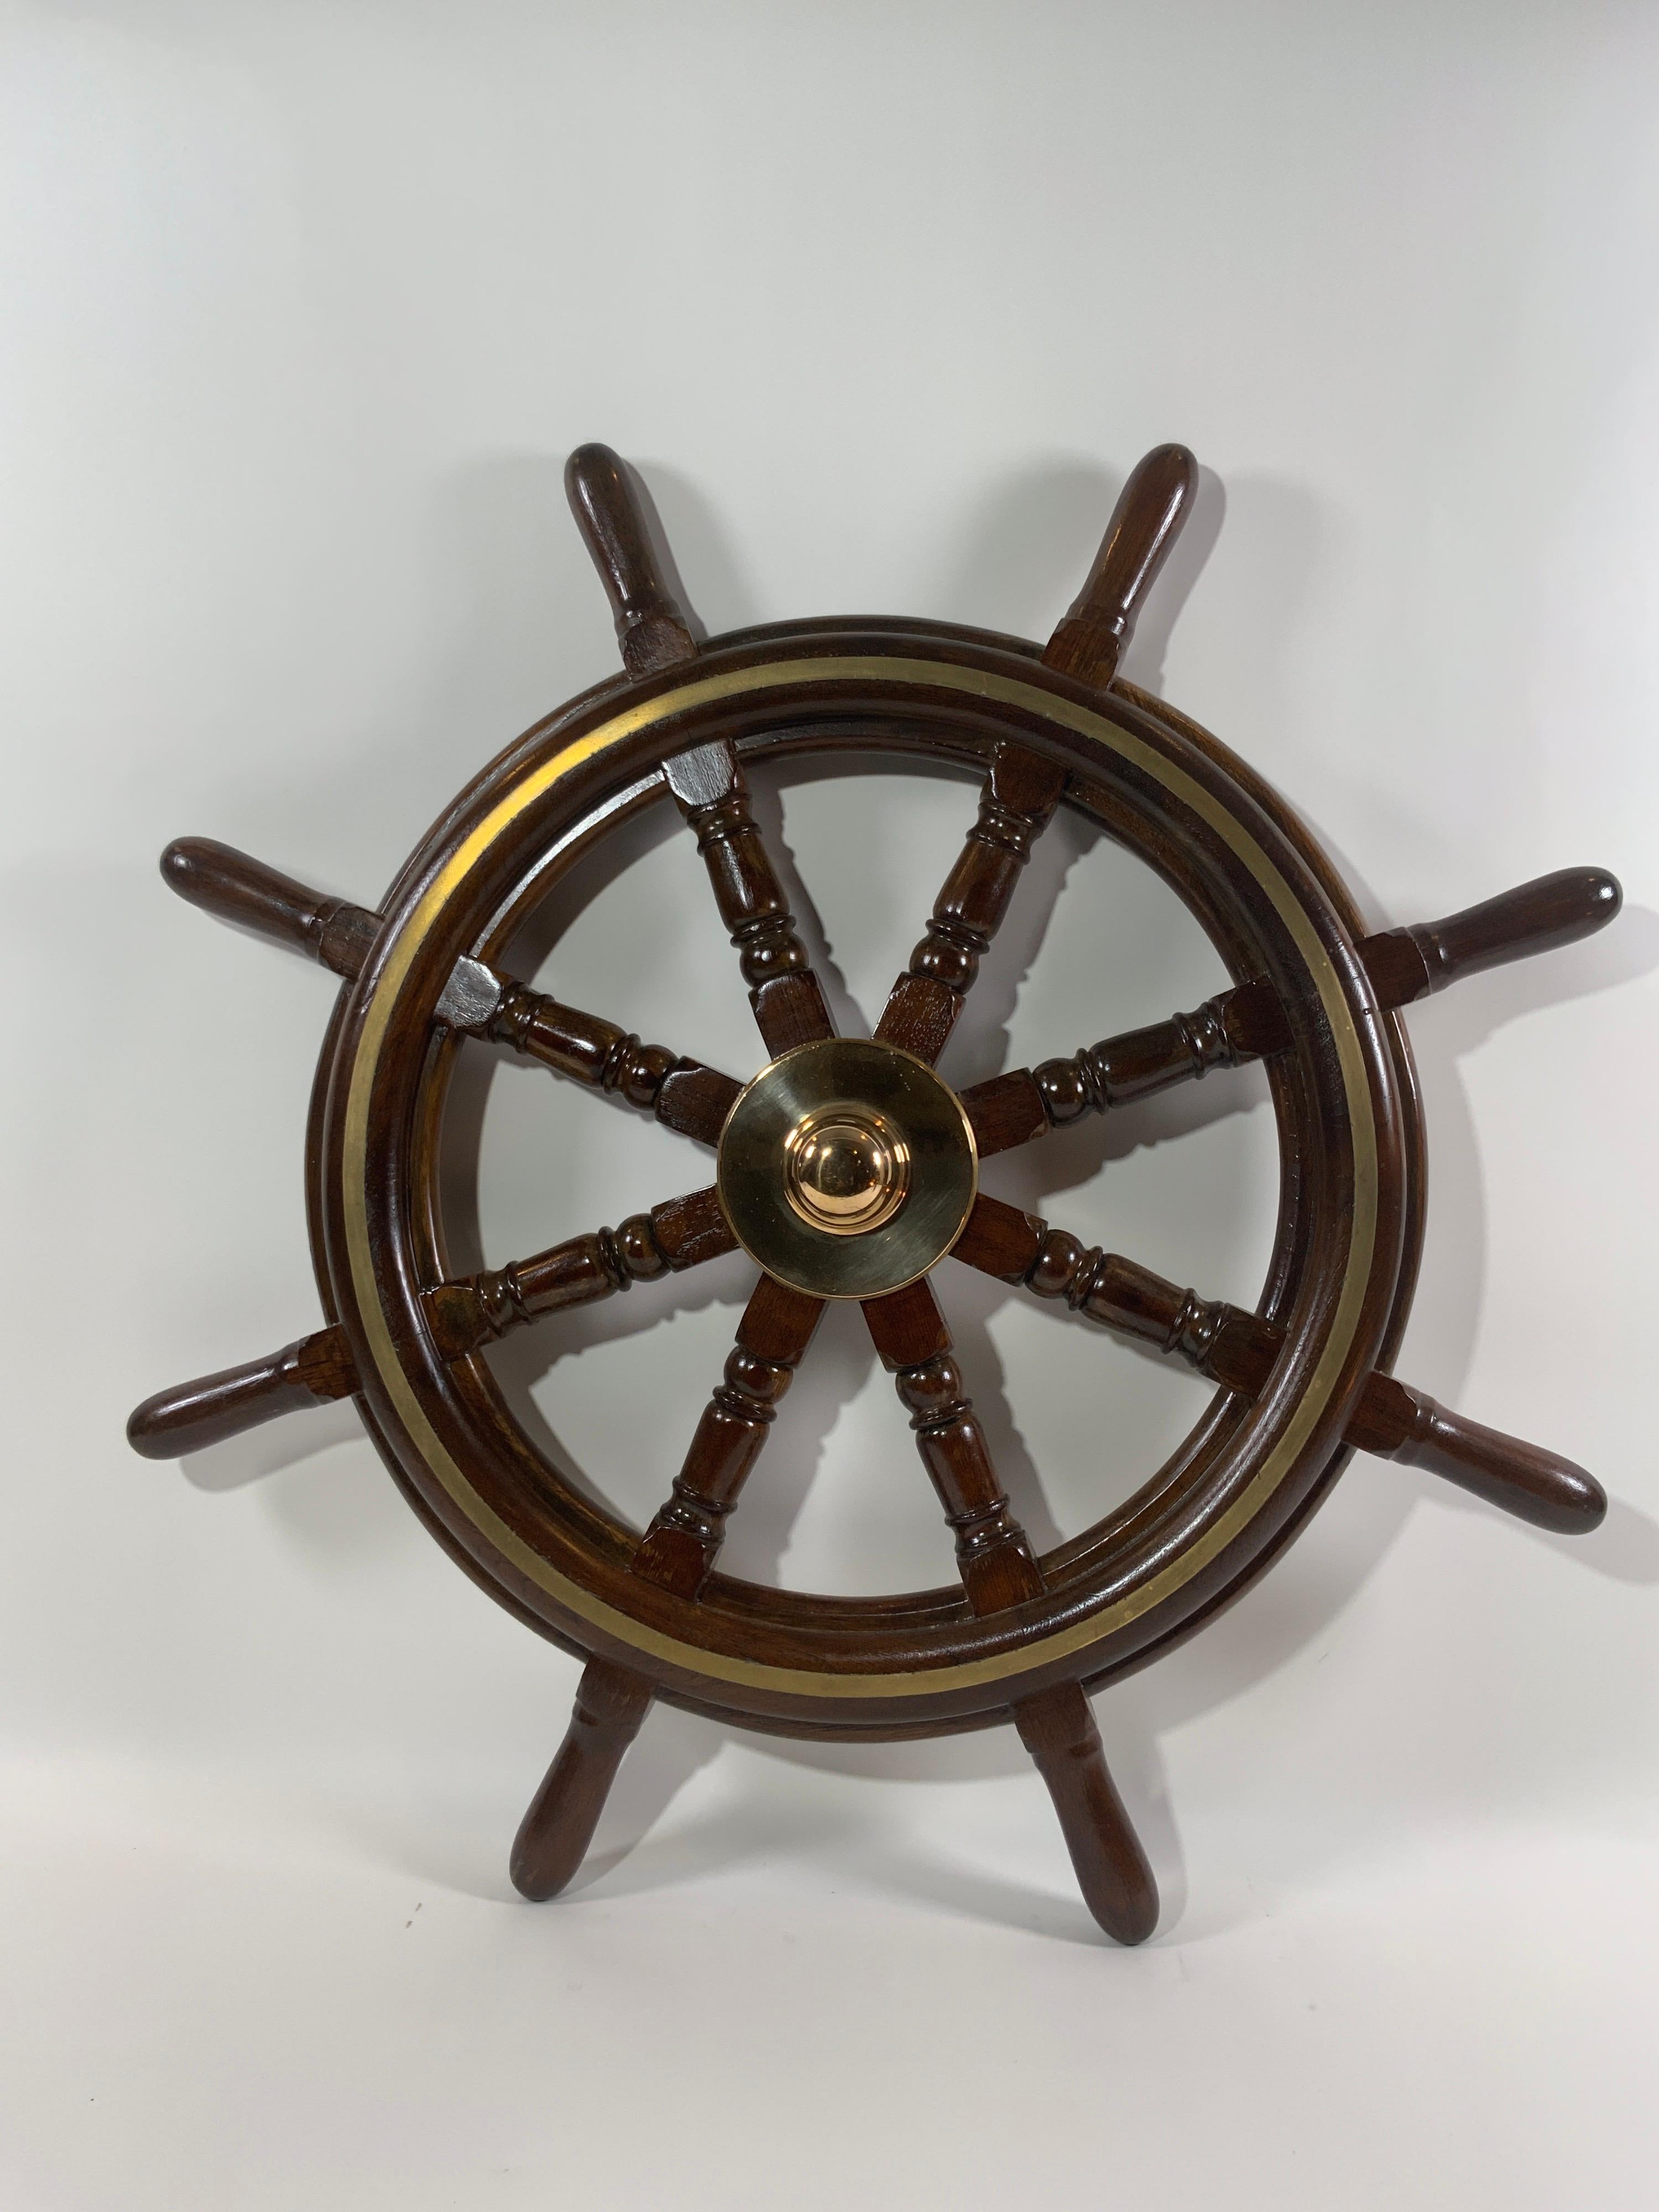 Eight-spoke ship's wheel with turned spokes, a brass hub and band inlay.

Overall dimensions: 38